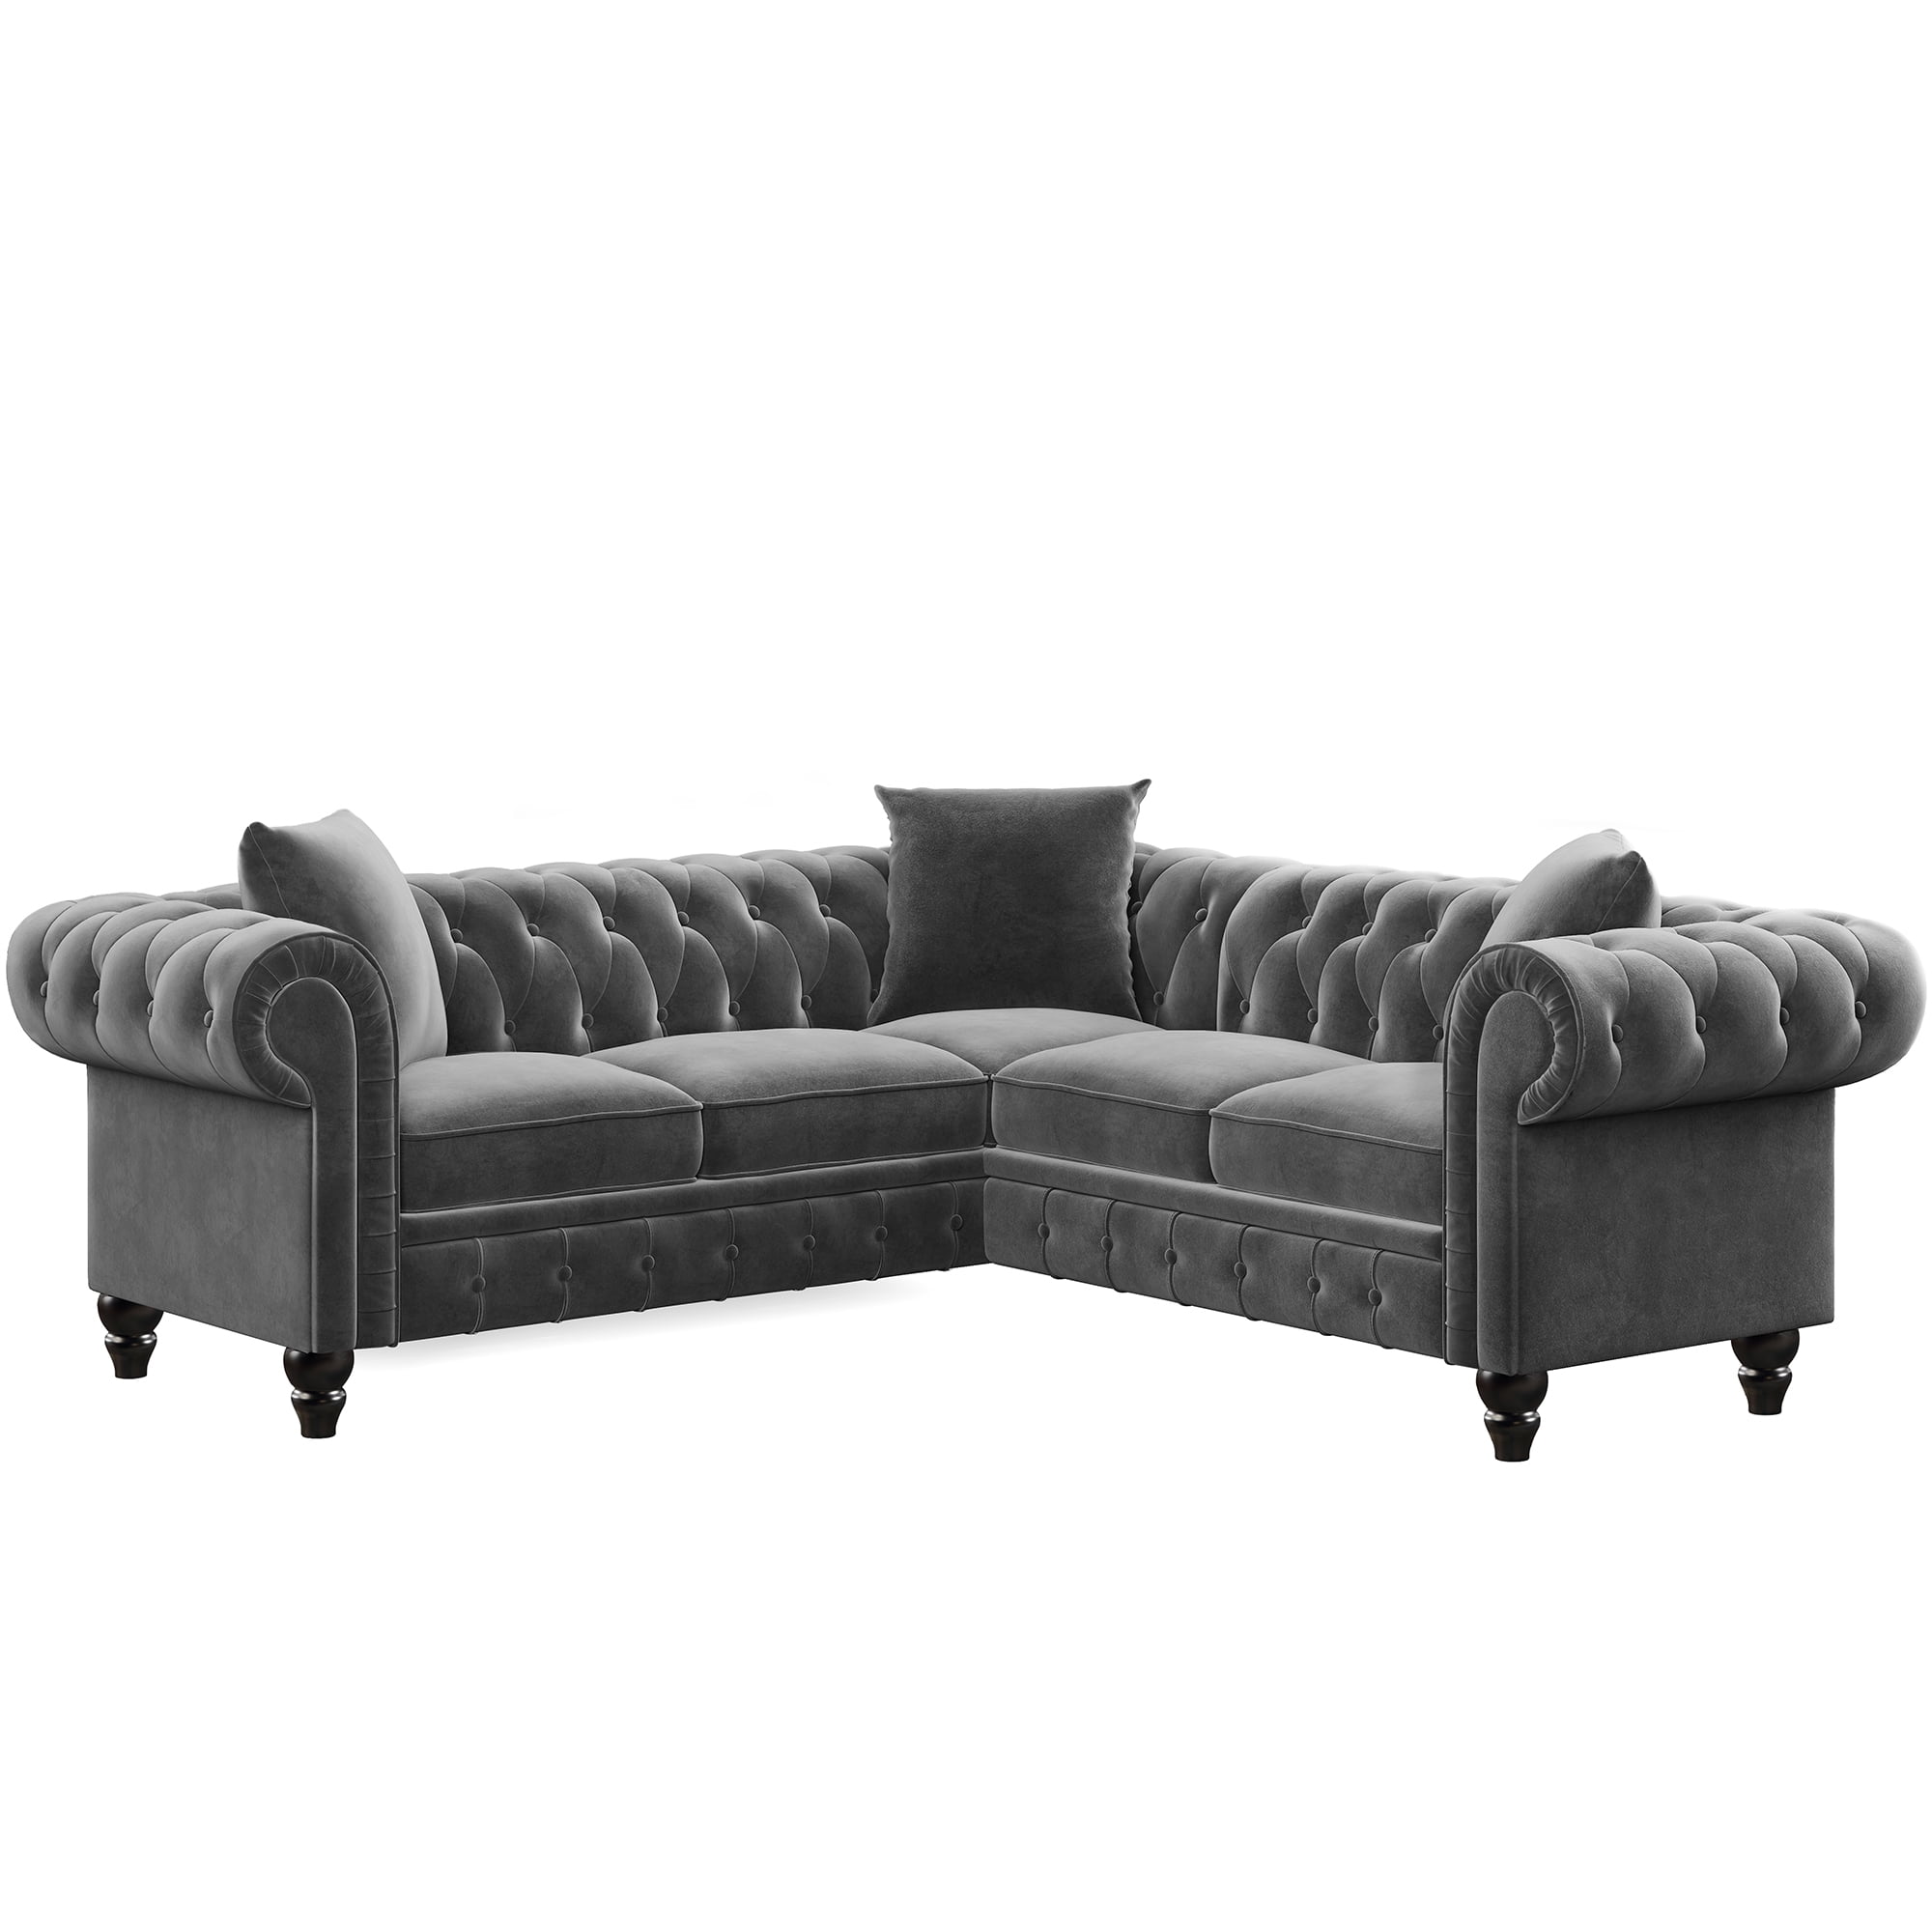 Tufted Chesterfield Loveseat Couches, Classic High-End Velvet Rolled